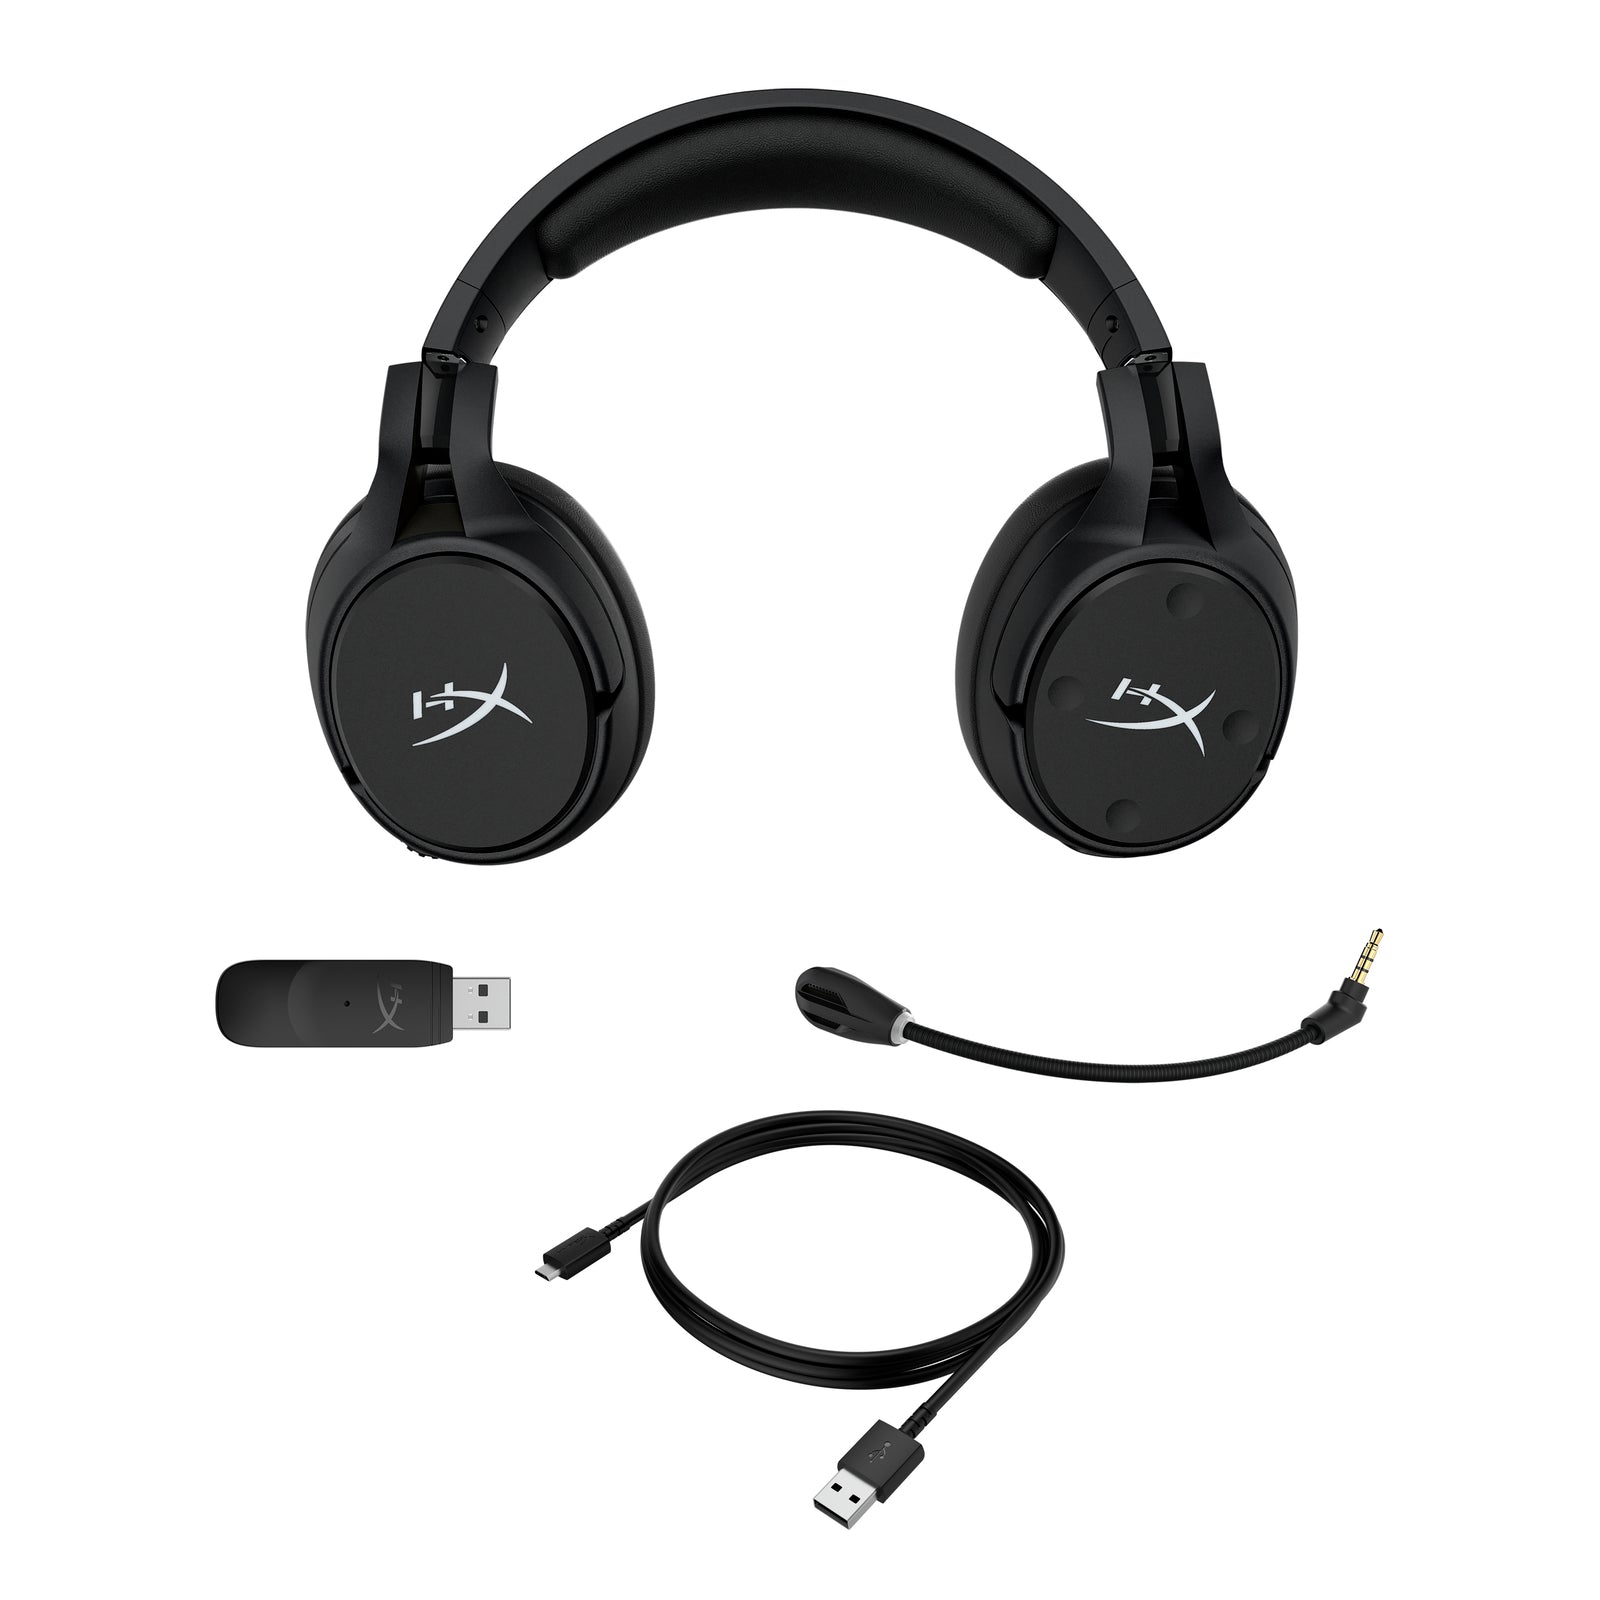 Front main view of the HyperX Cloud Flight S Wireless Gaming Headset featuring accessories and contents